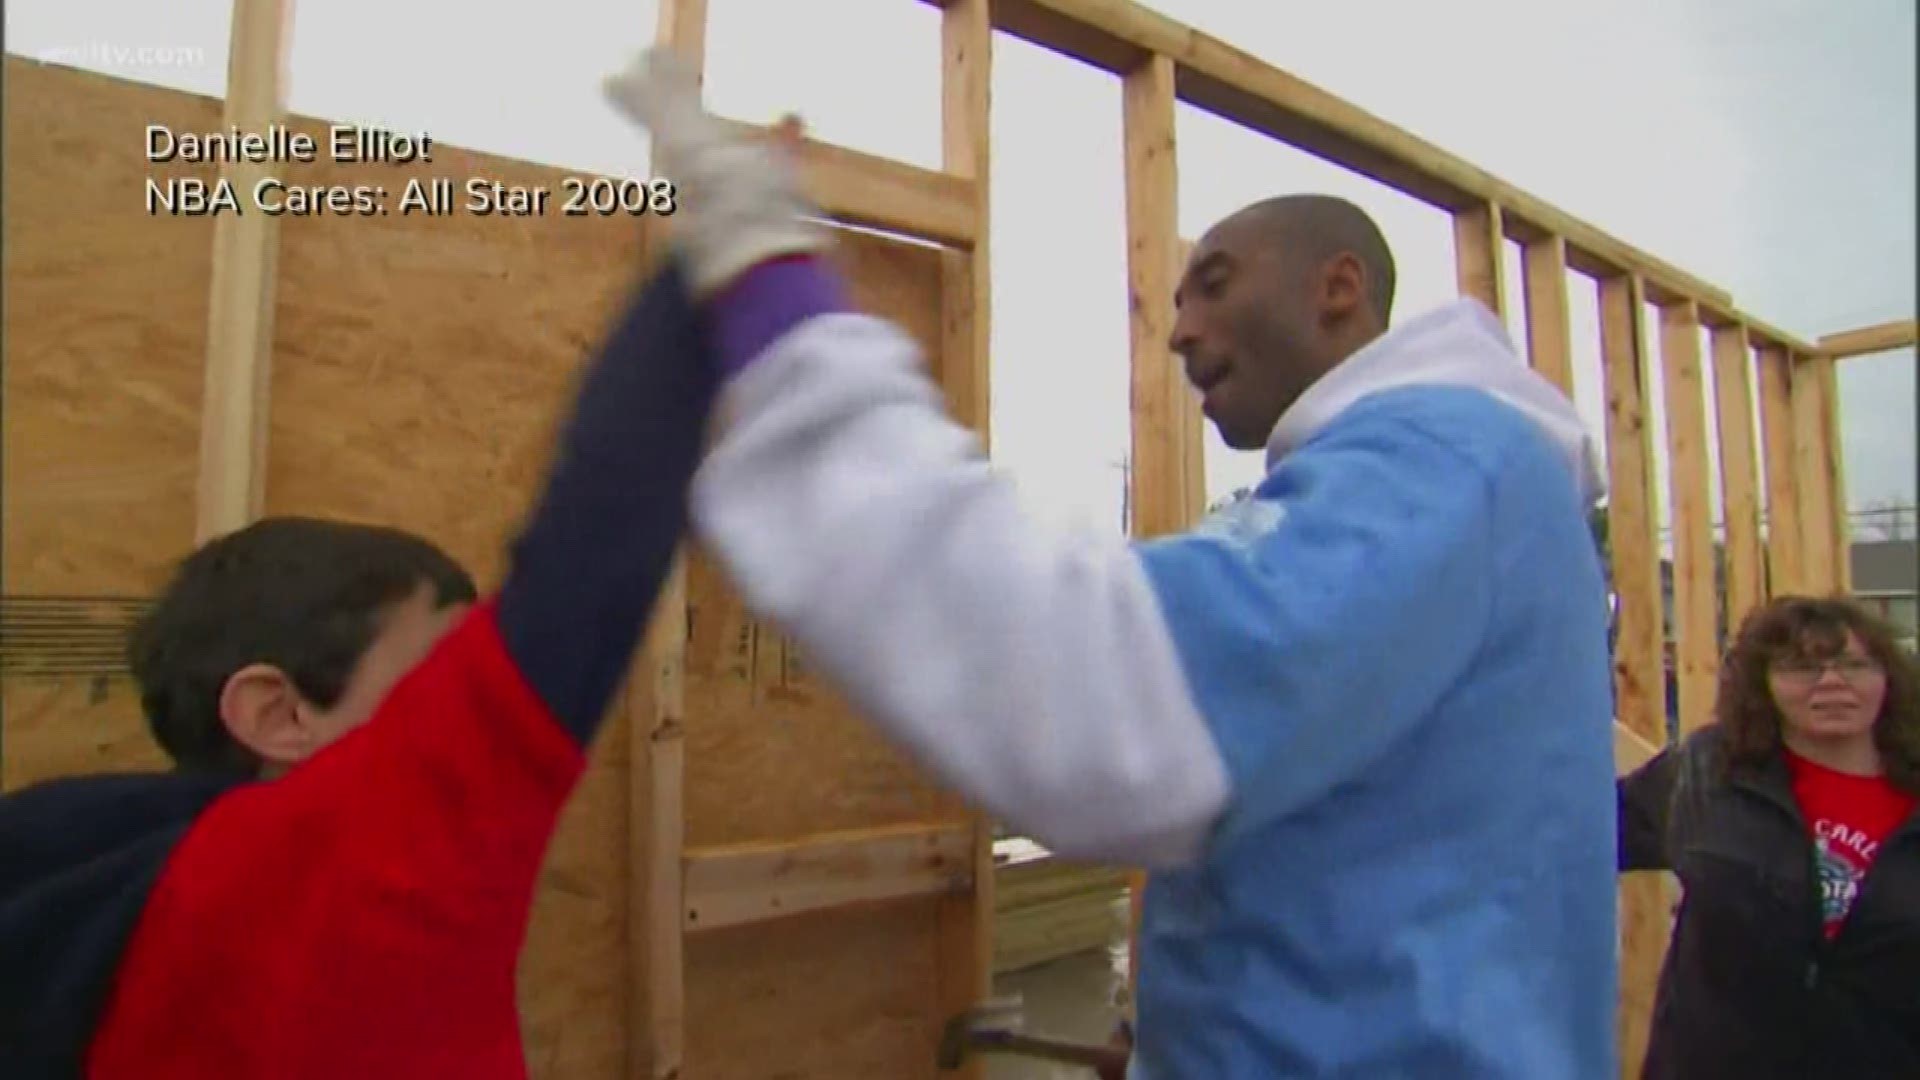 It was 12 years ago when Bryant was in New Orleans helping build a home for a local family